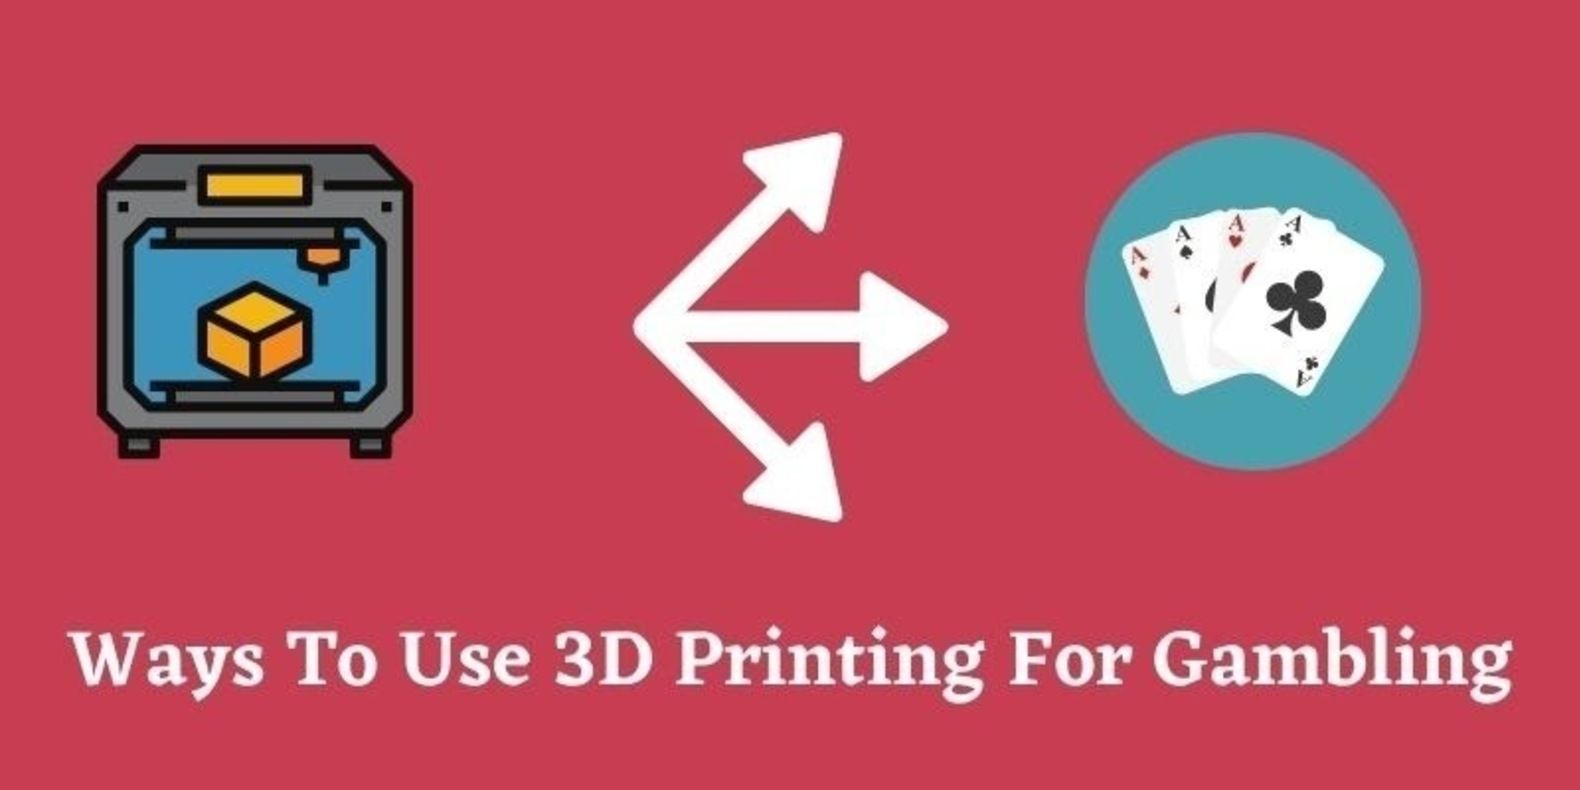 3 Ways To Use 3D Printing For Gaming